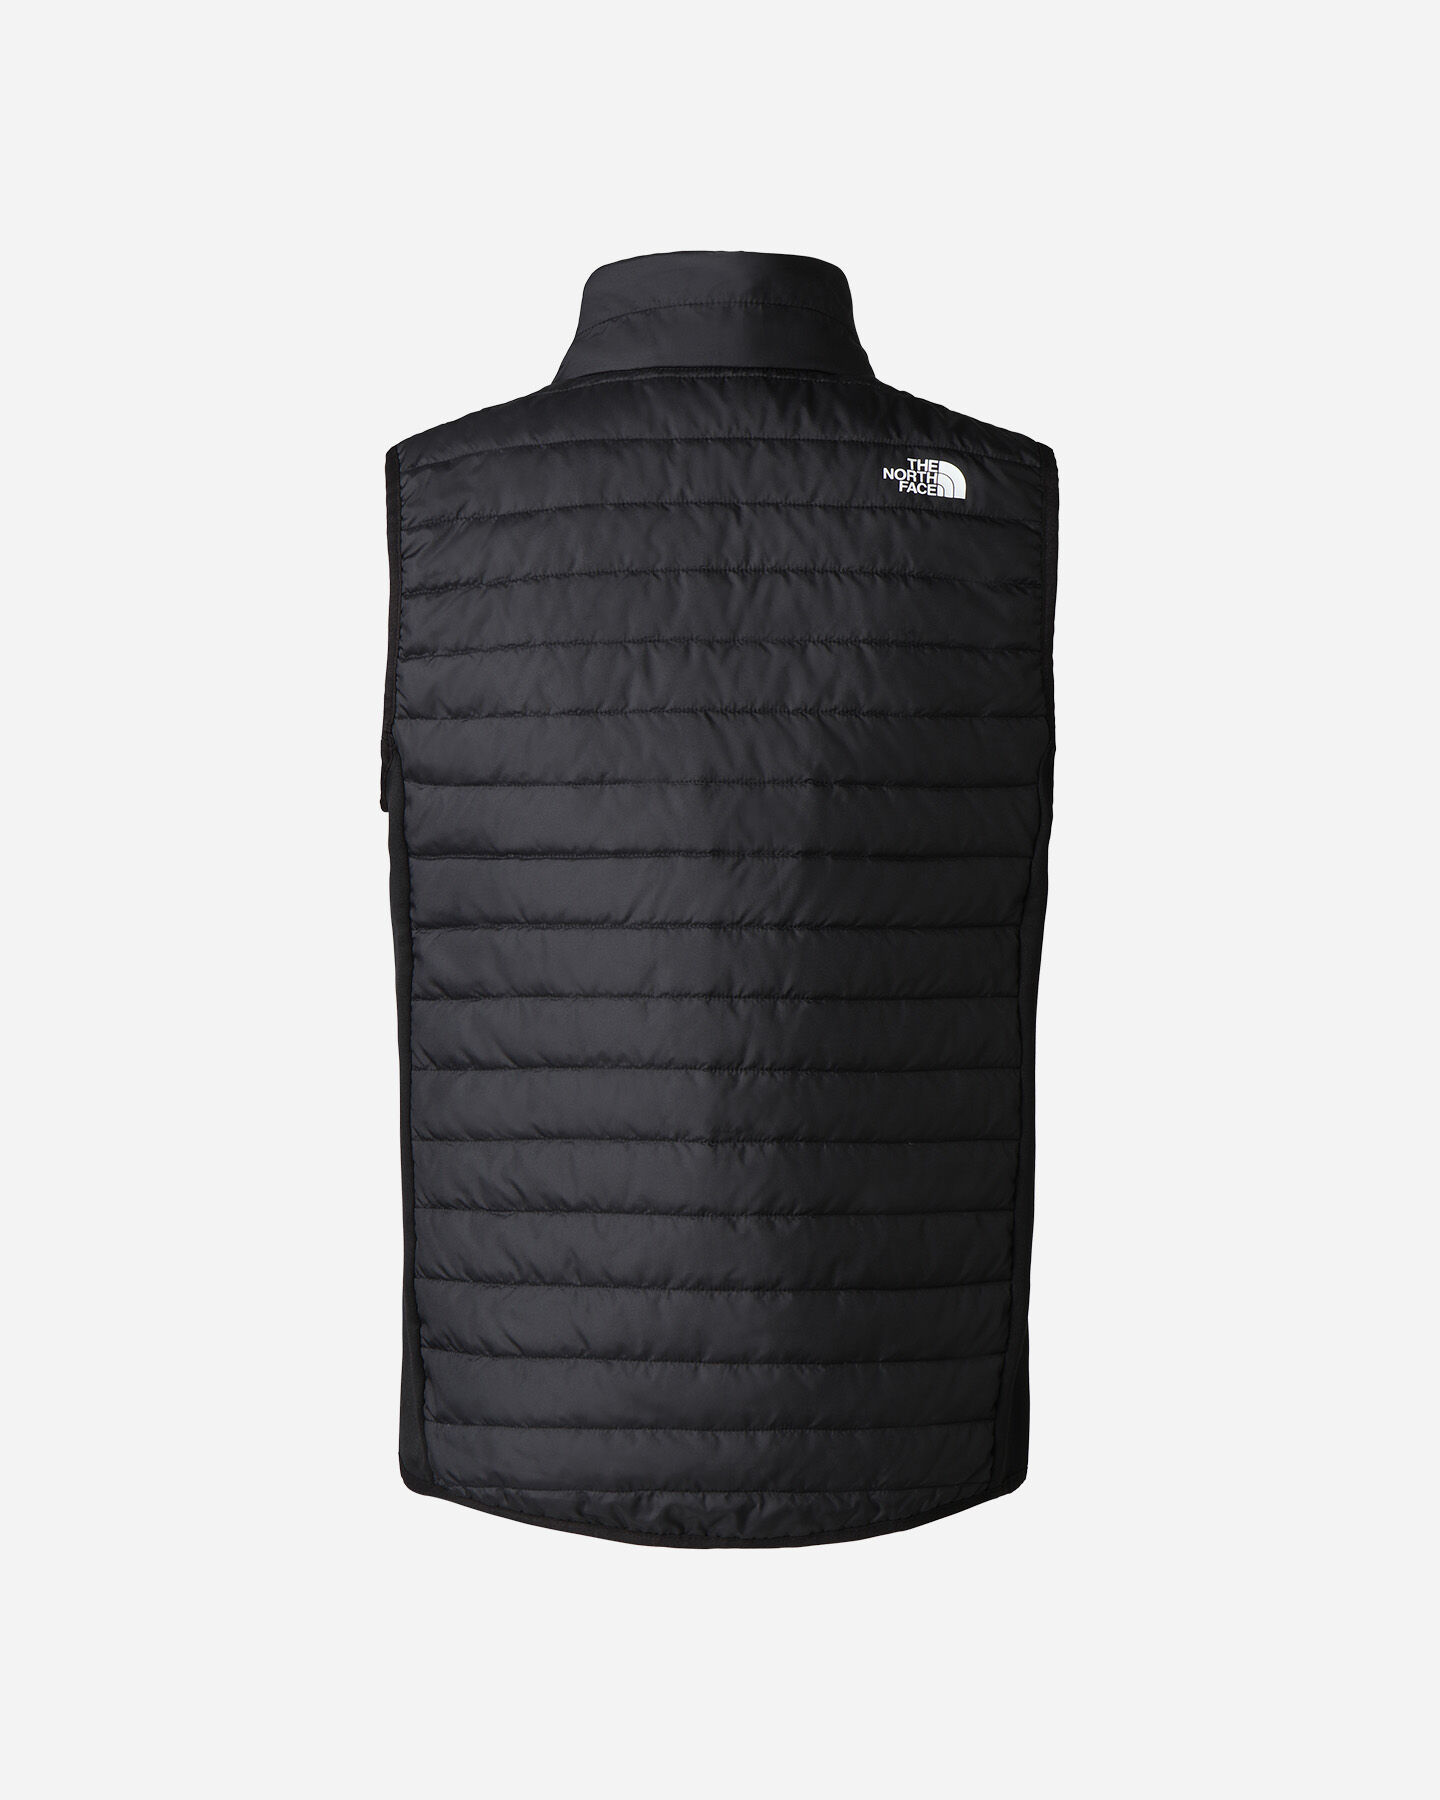  Gilet THE NORTH FACE CANYONLANDS HYBRID W S5475322|JK3|M scatto 1